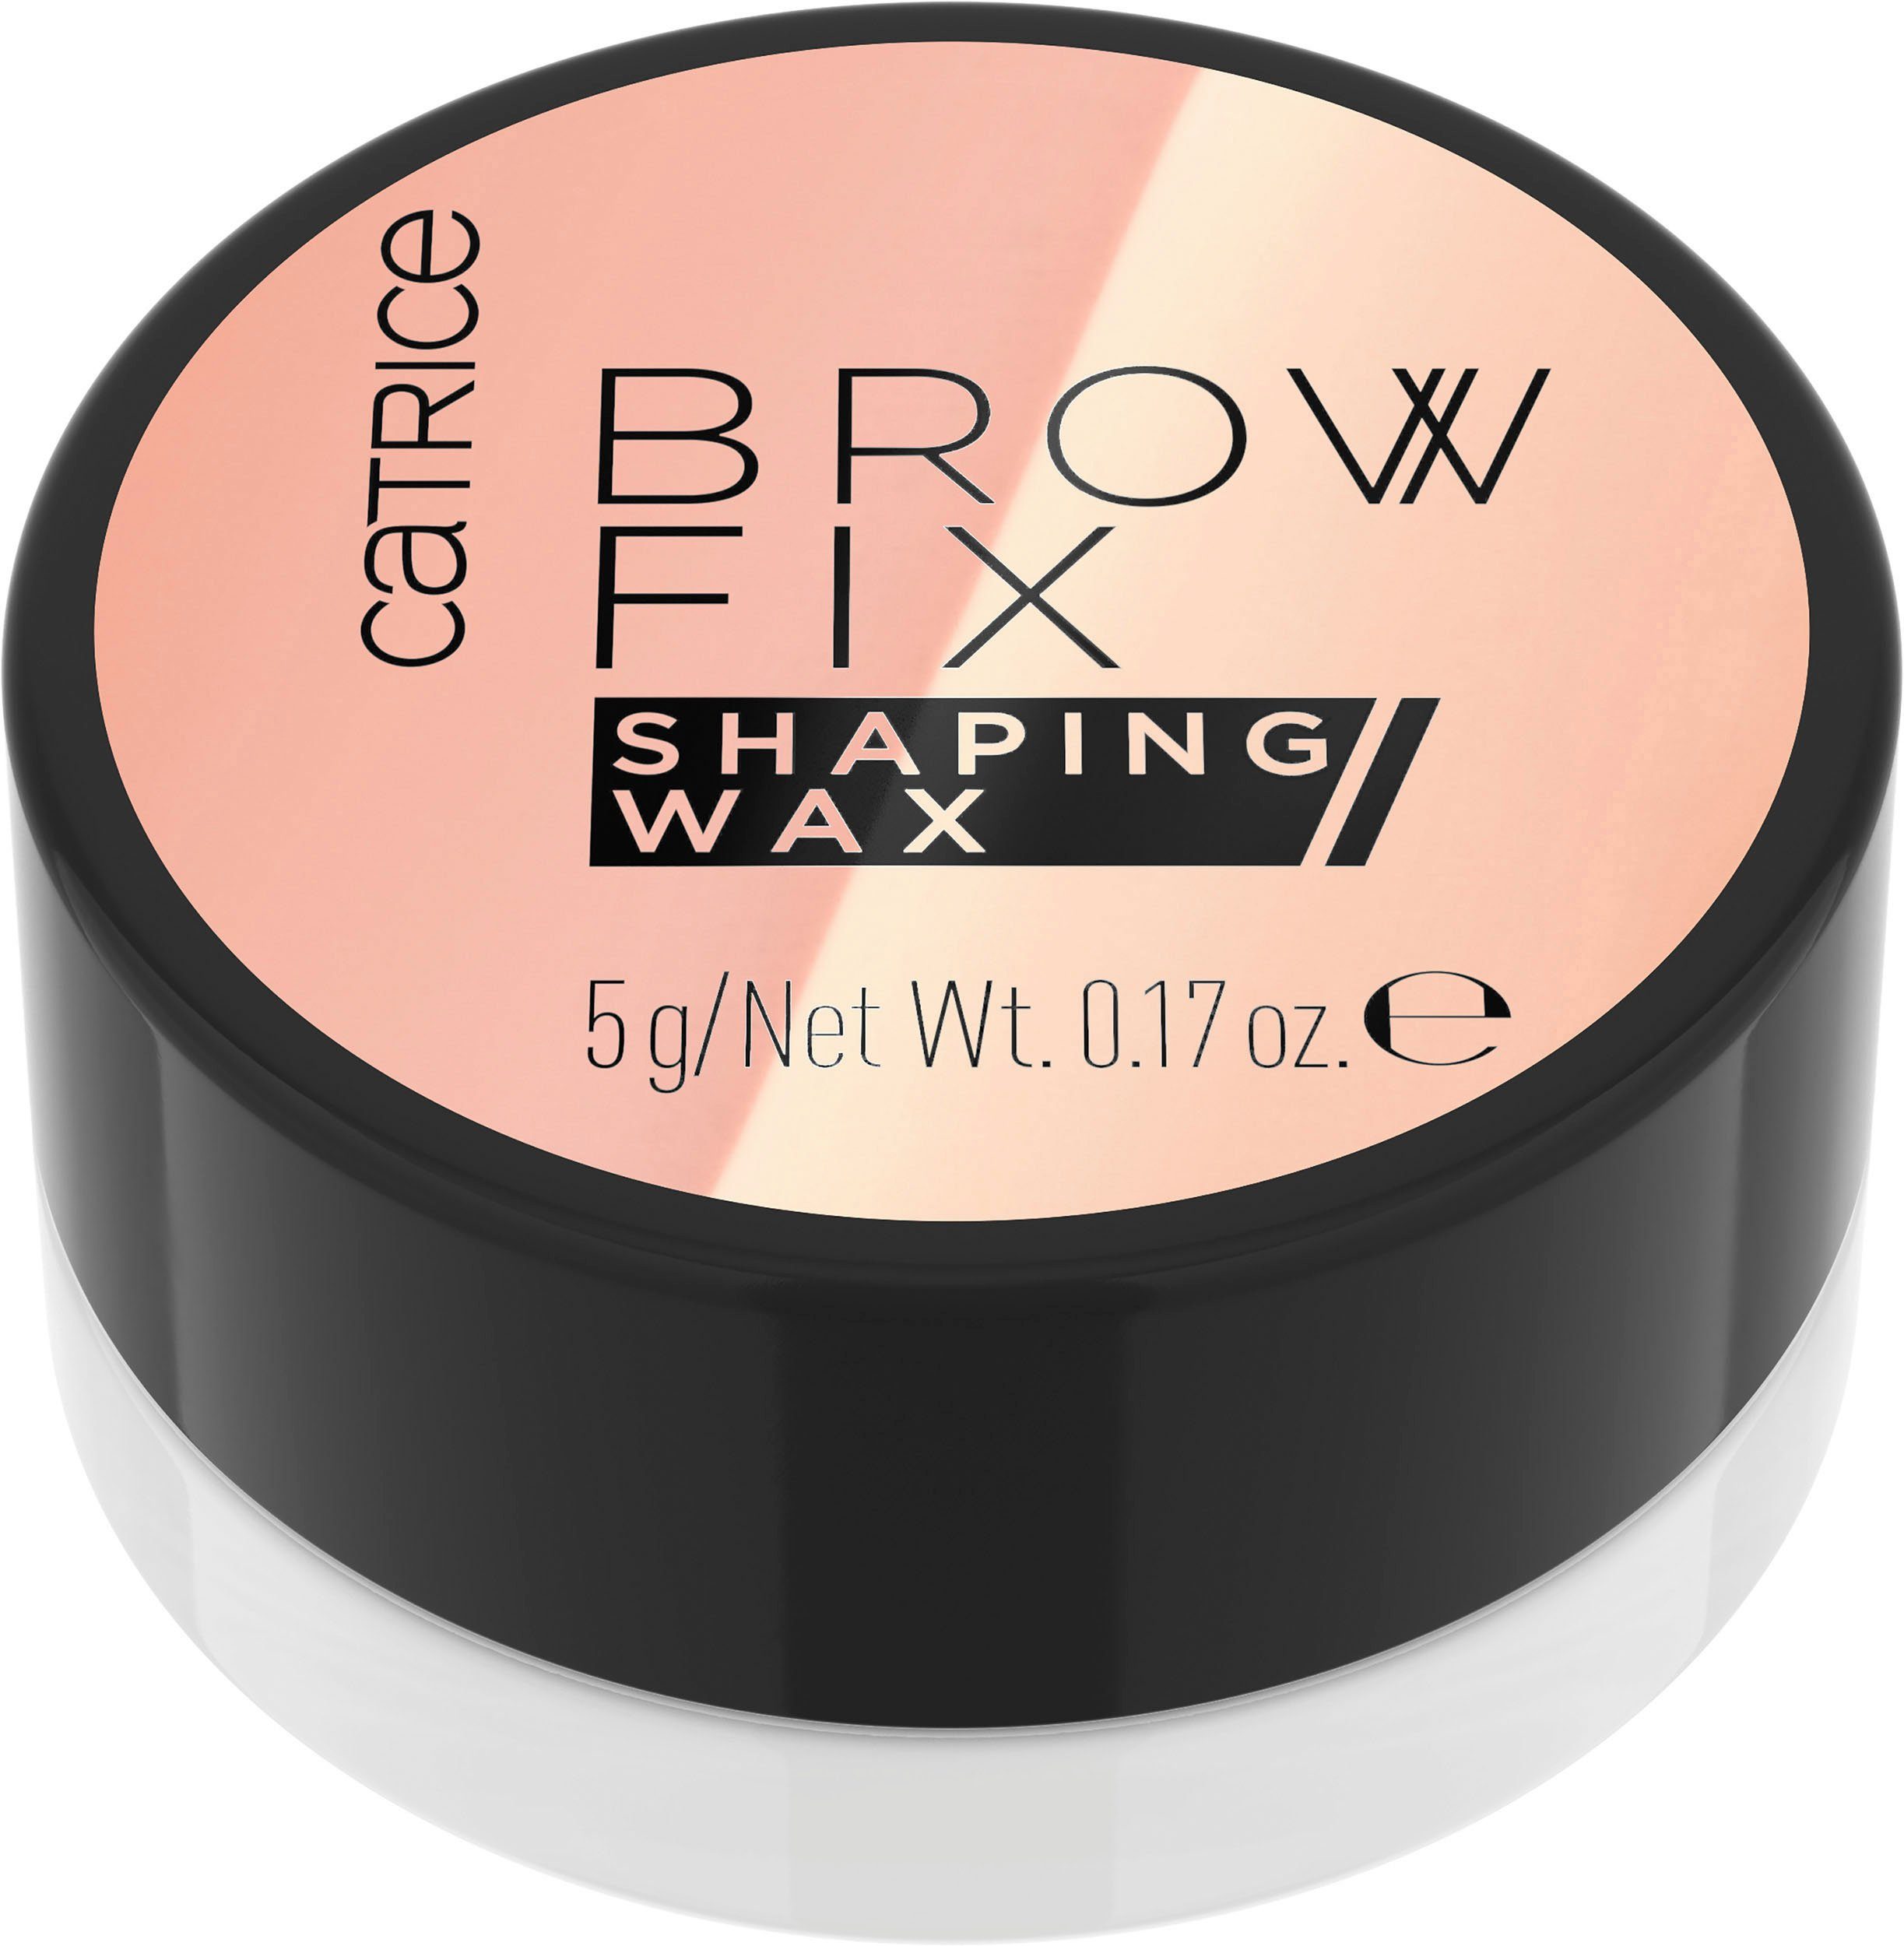 Catrice Augenbrauen-Gel Catrice Brow 3-tlg. Fix Shaping Wax 010